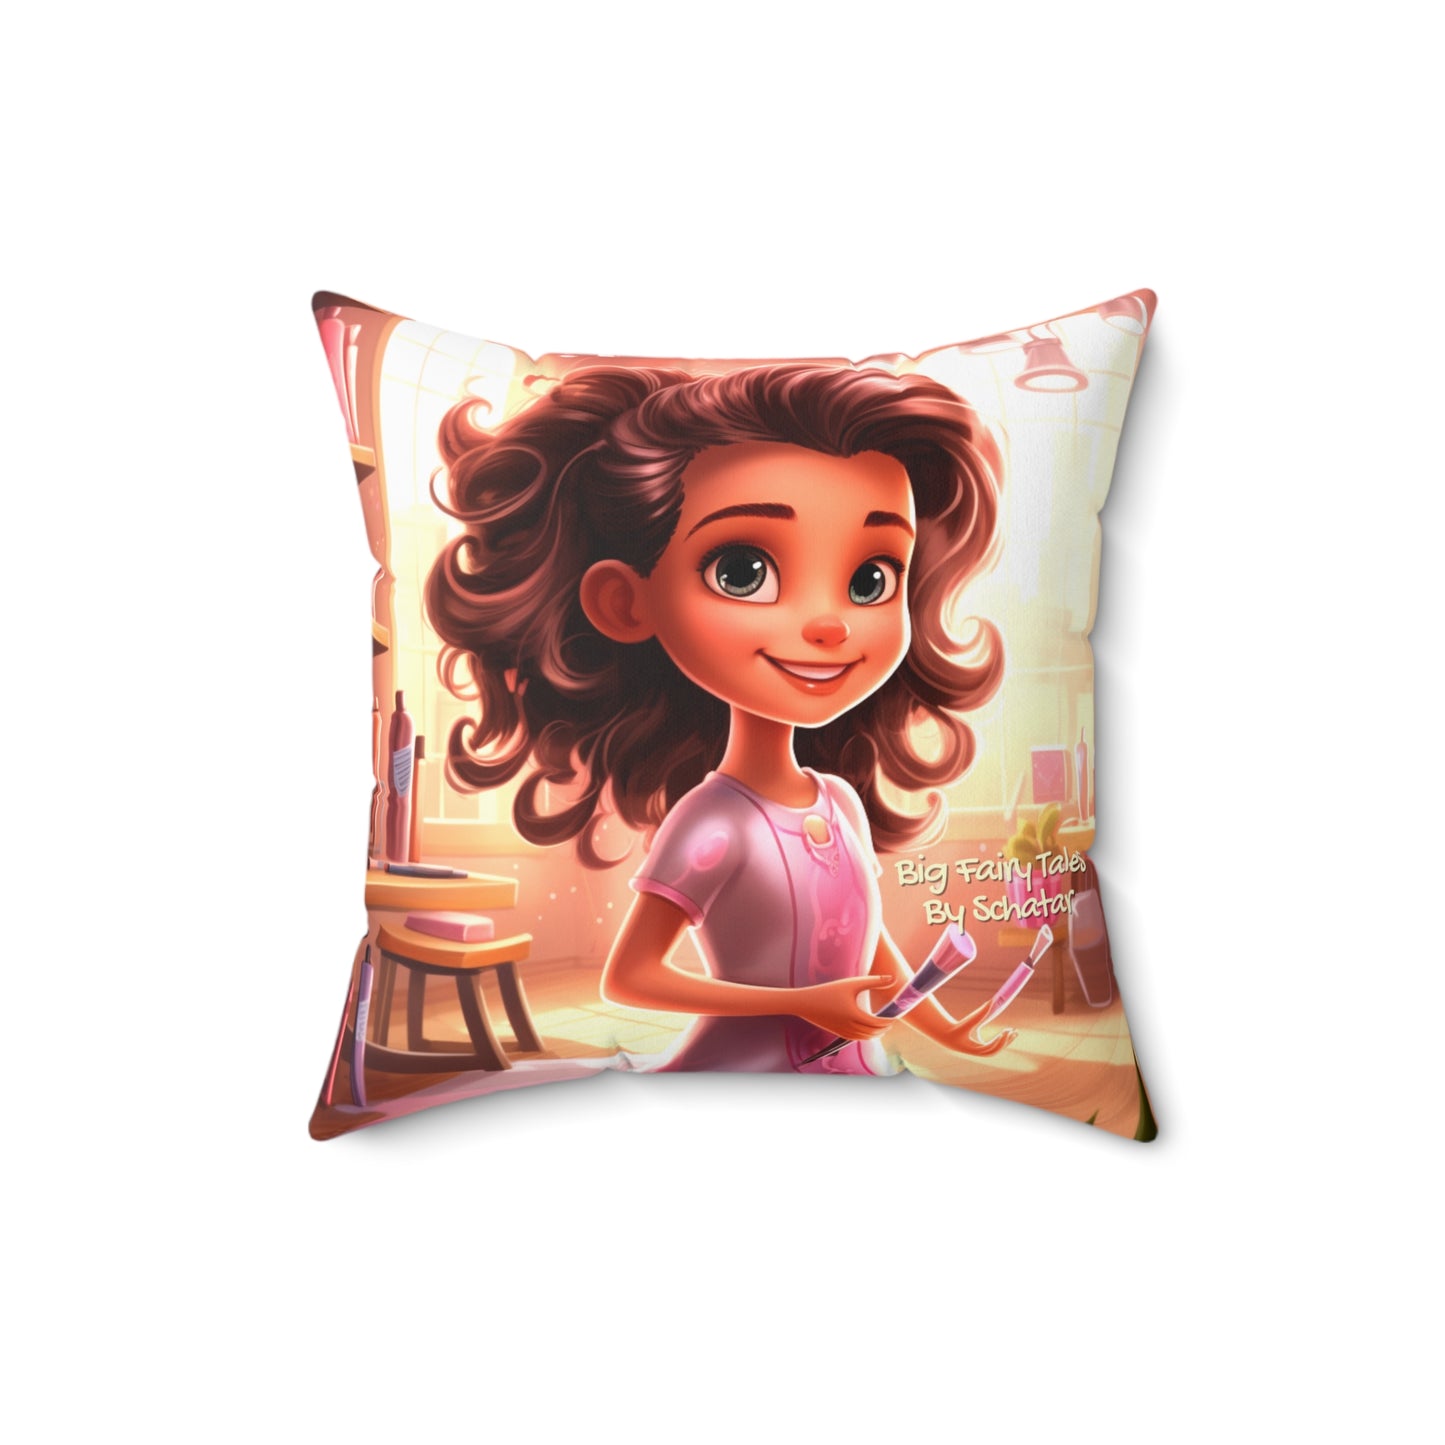 Cosmetic Line Founder - Big Little Professionals Plush Pillow 21 From Big Fairy Tales By Schatar